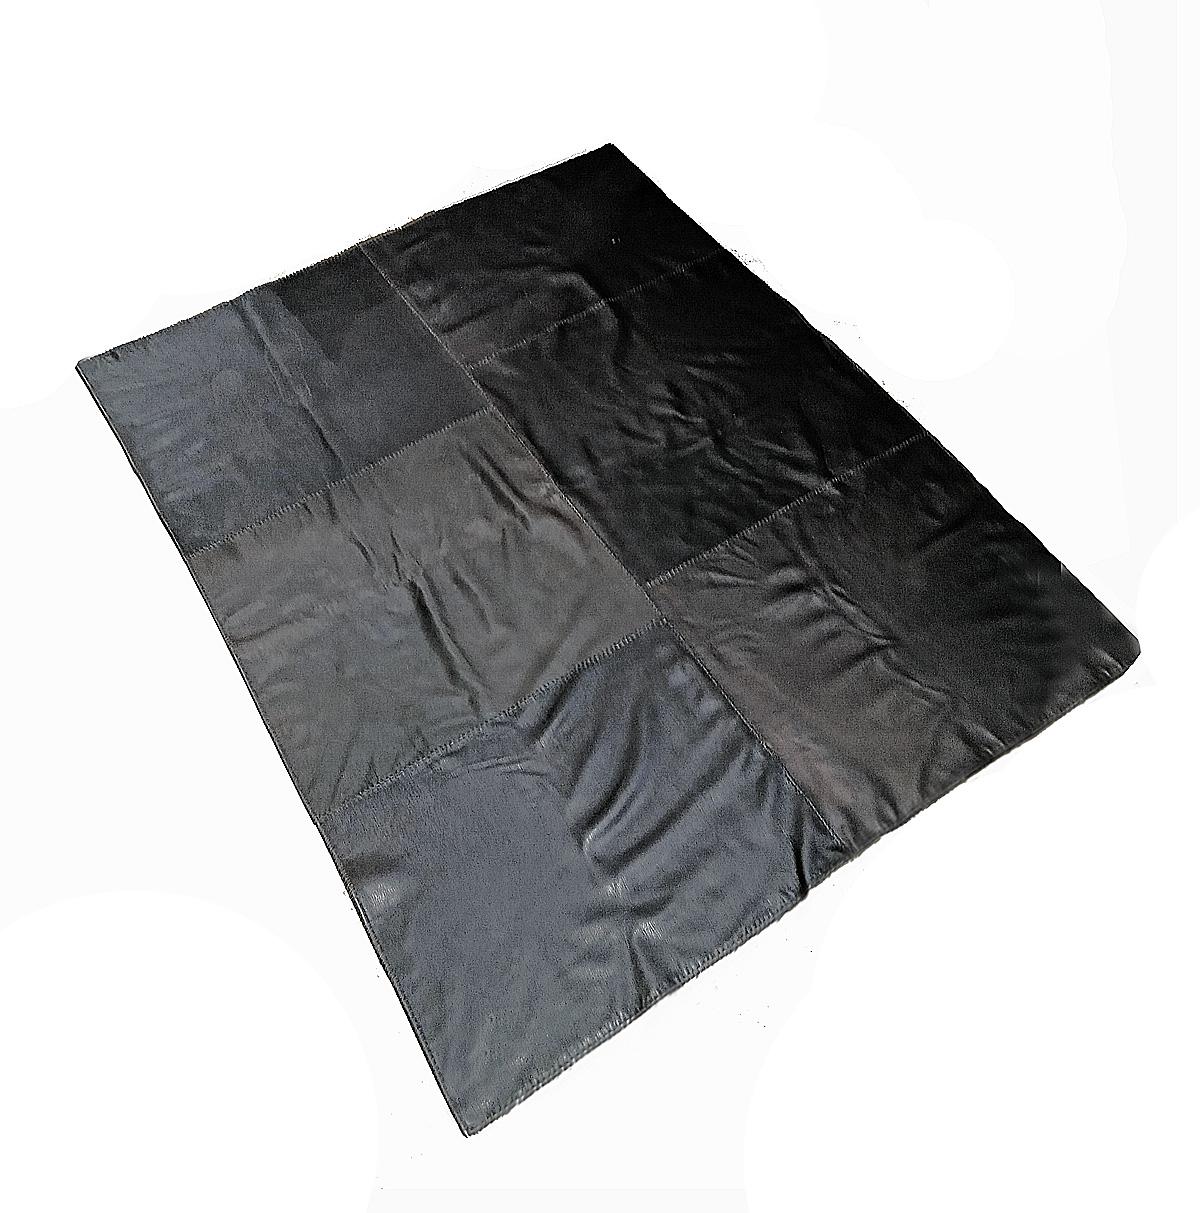 Arts and Crafts Leather and Wool Throw / Blanket